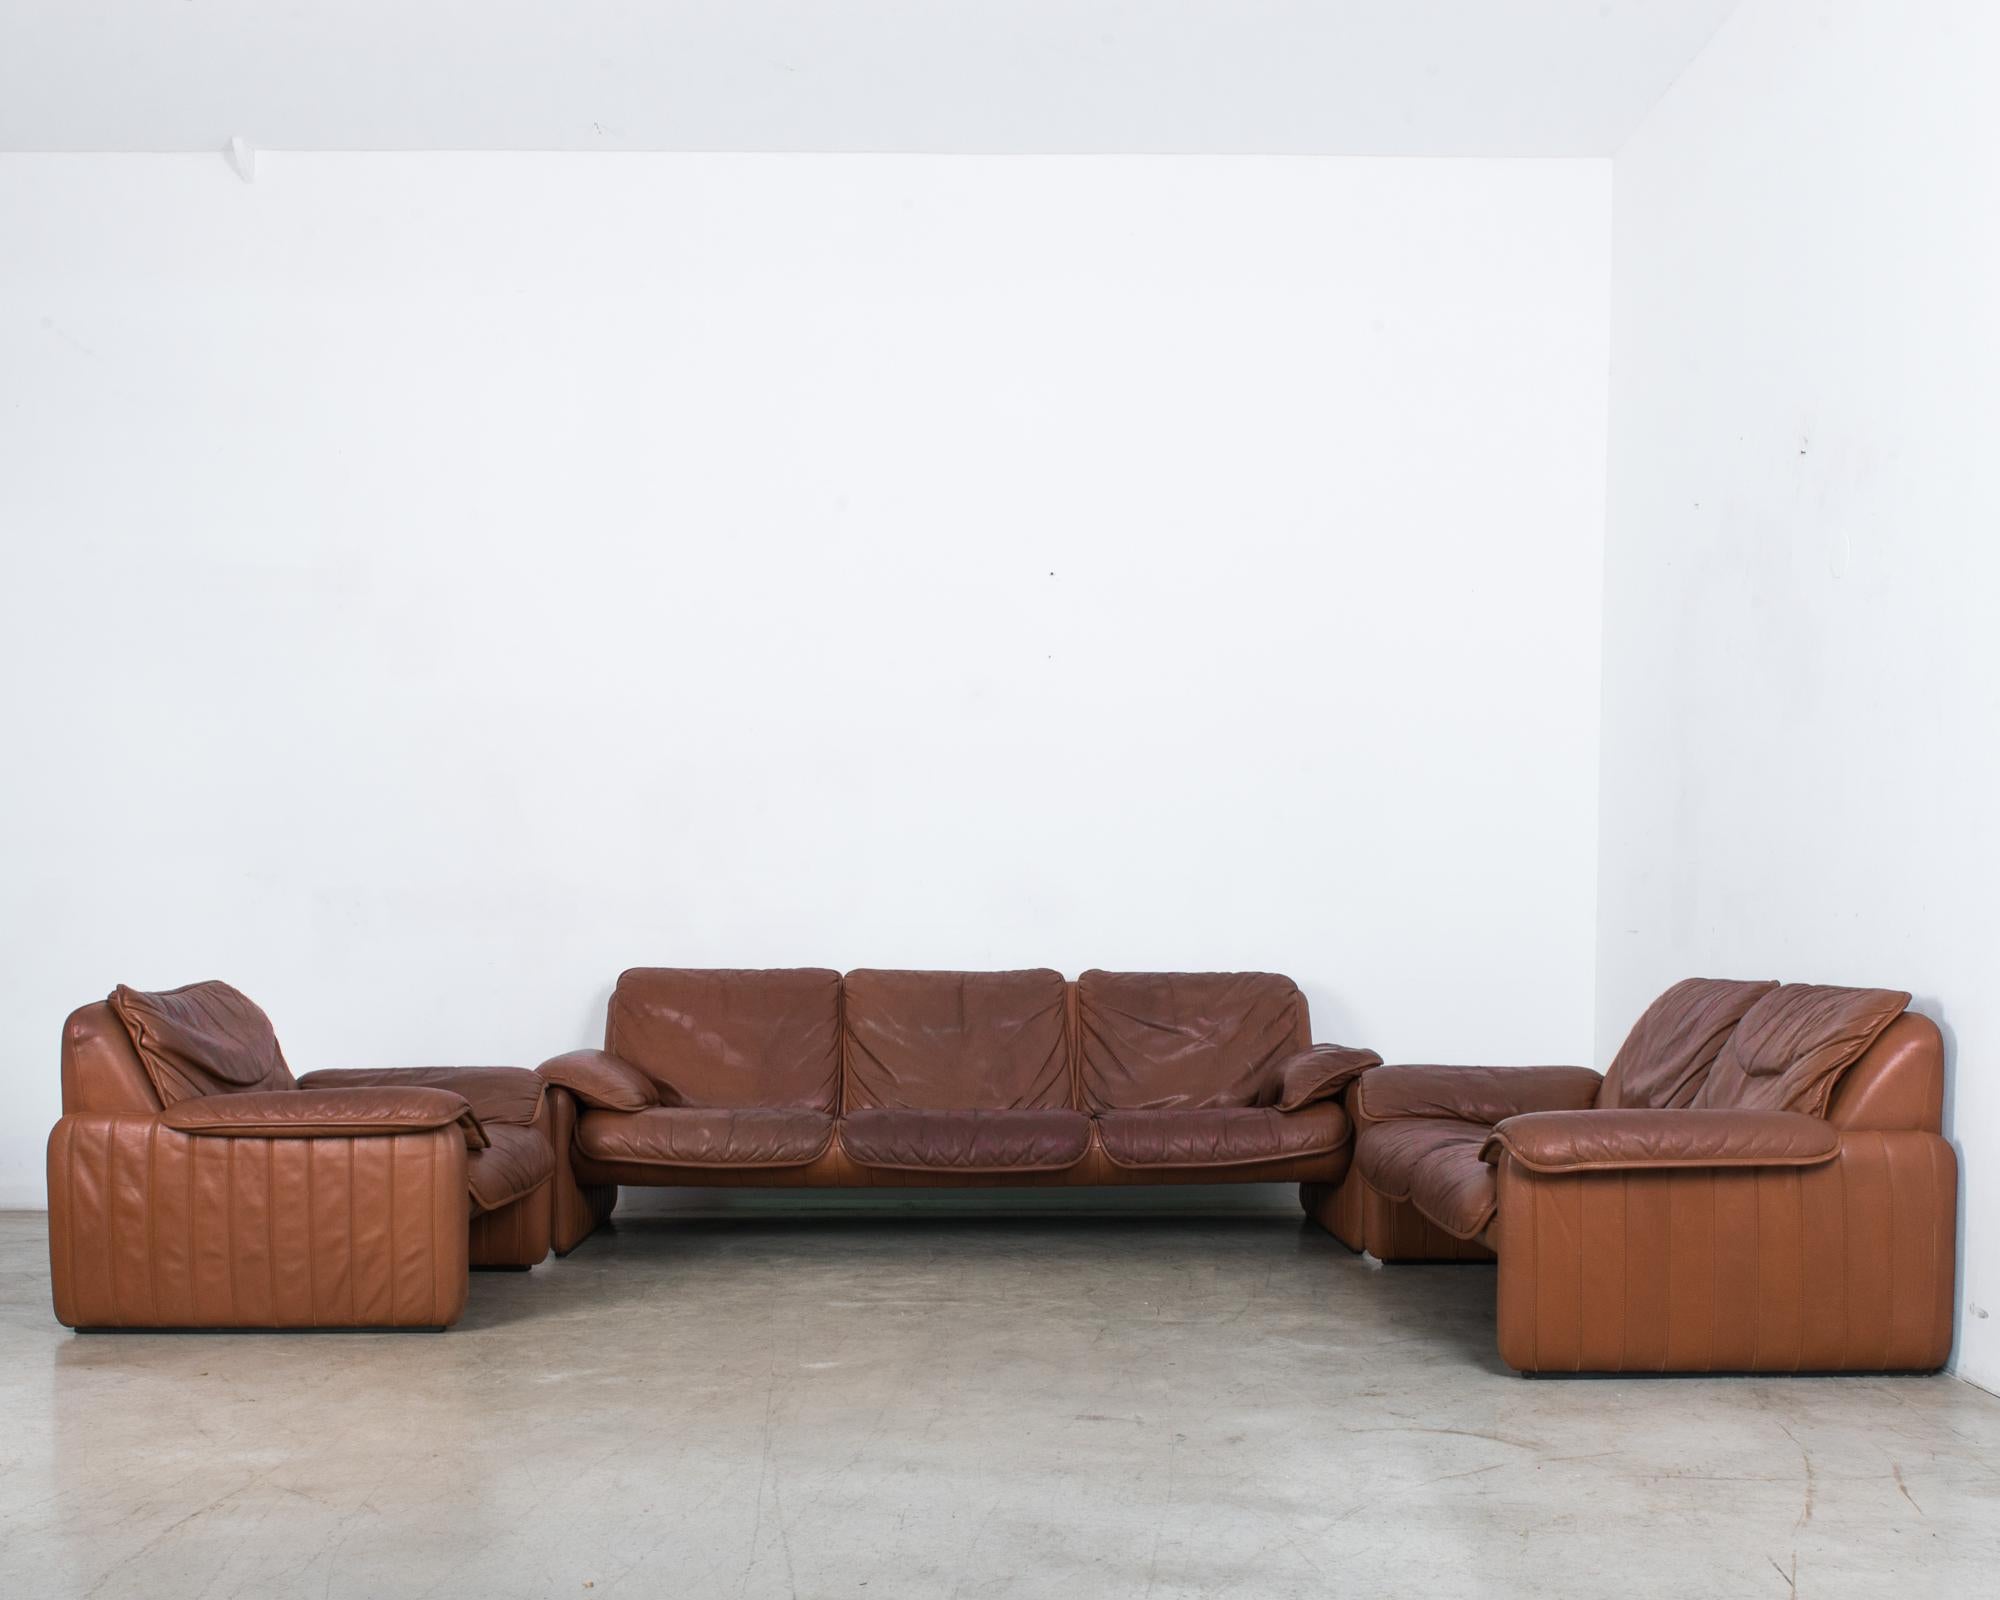 A classic model, the DS 61 by Swiss manufacturer De Sede. This set features an armchair, loveseat, and standard sofa. Known both for their leather craftsmanship and their contemporary designs. This sofa set features a distinctive midcentury